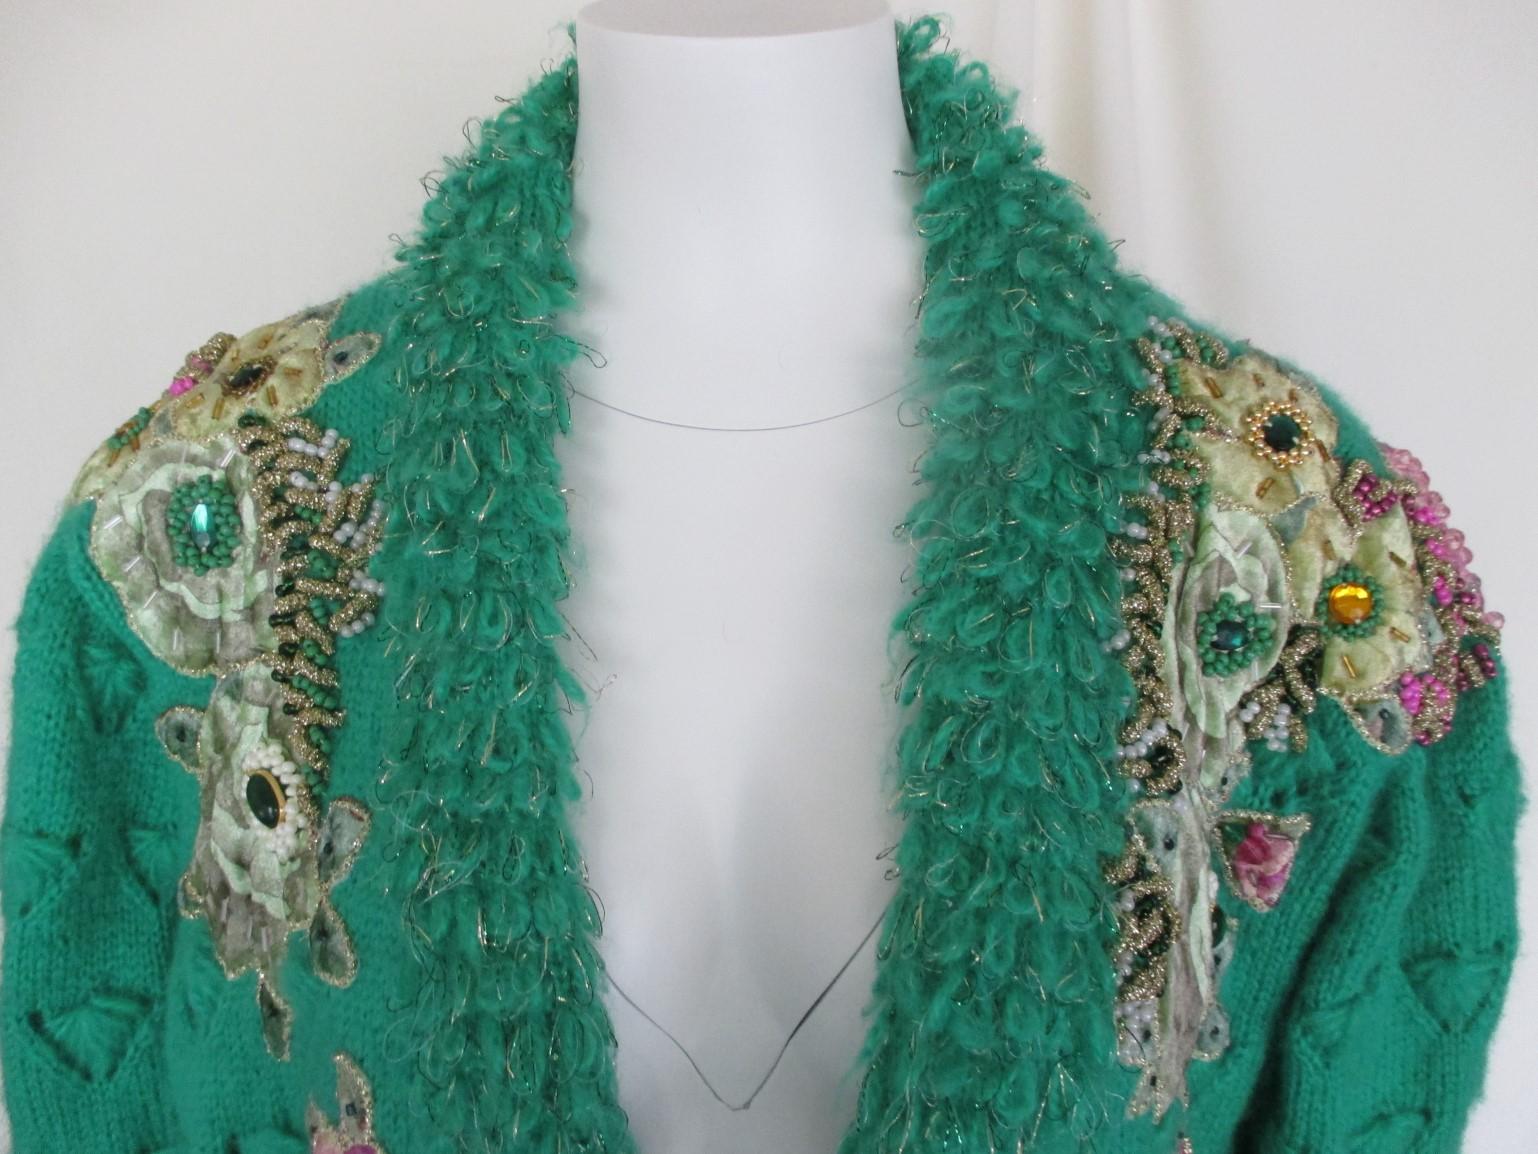 Fabulous original 80/90s knitted coat with beaded flower appliqués throughout.
No closures 
Very good pre-owned vintage condition 
Size fits as medium/large but can be worn oversized at a smaller person, see section measurements.
Inside lining only